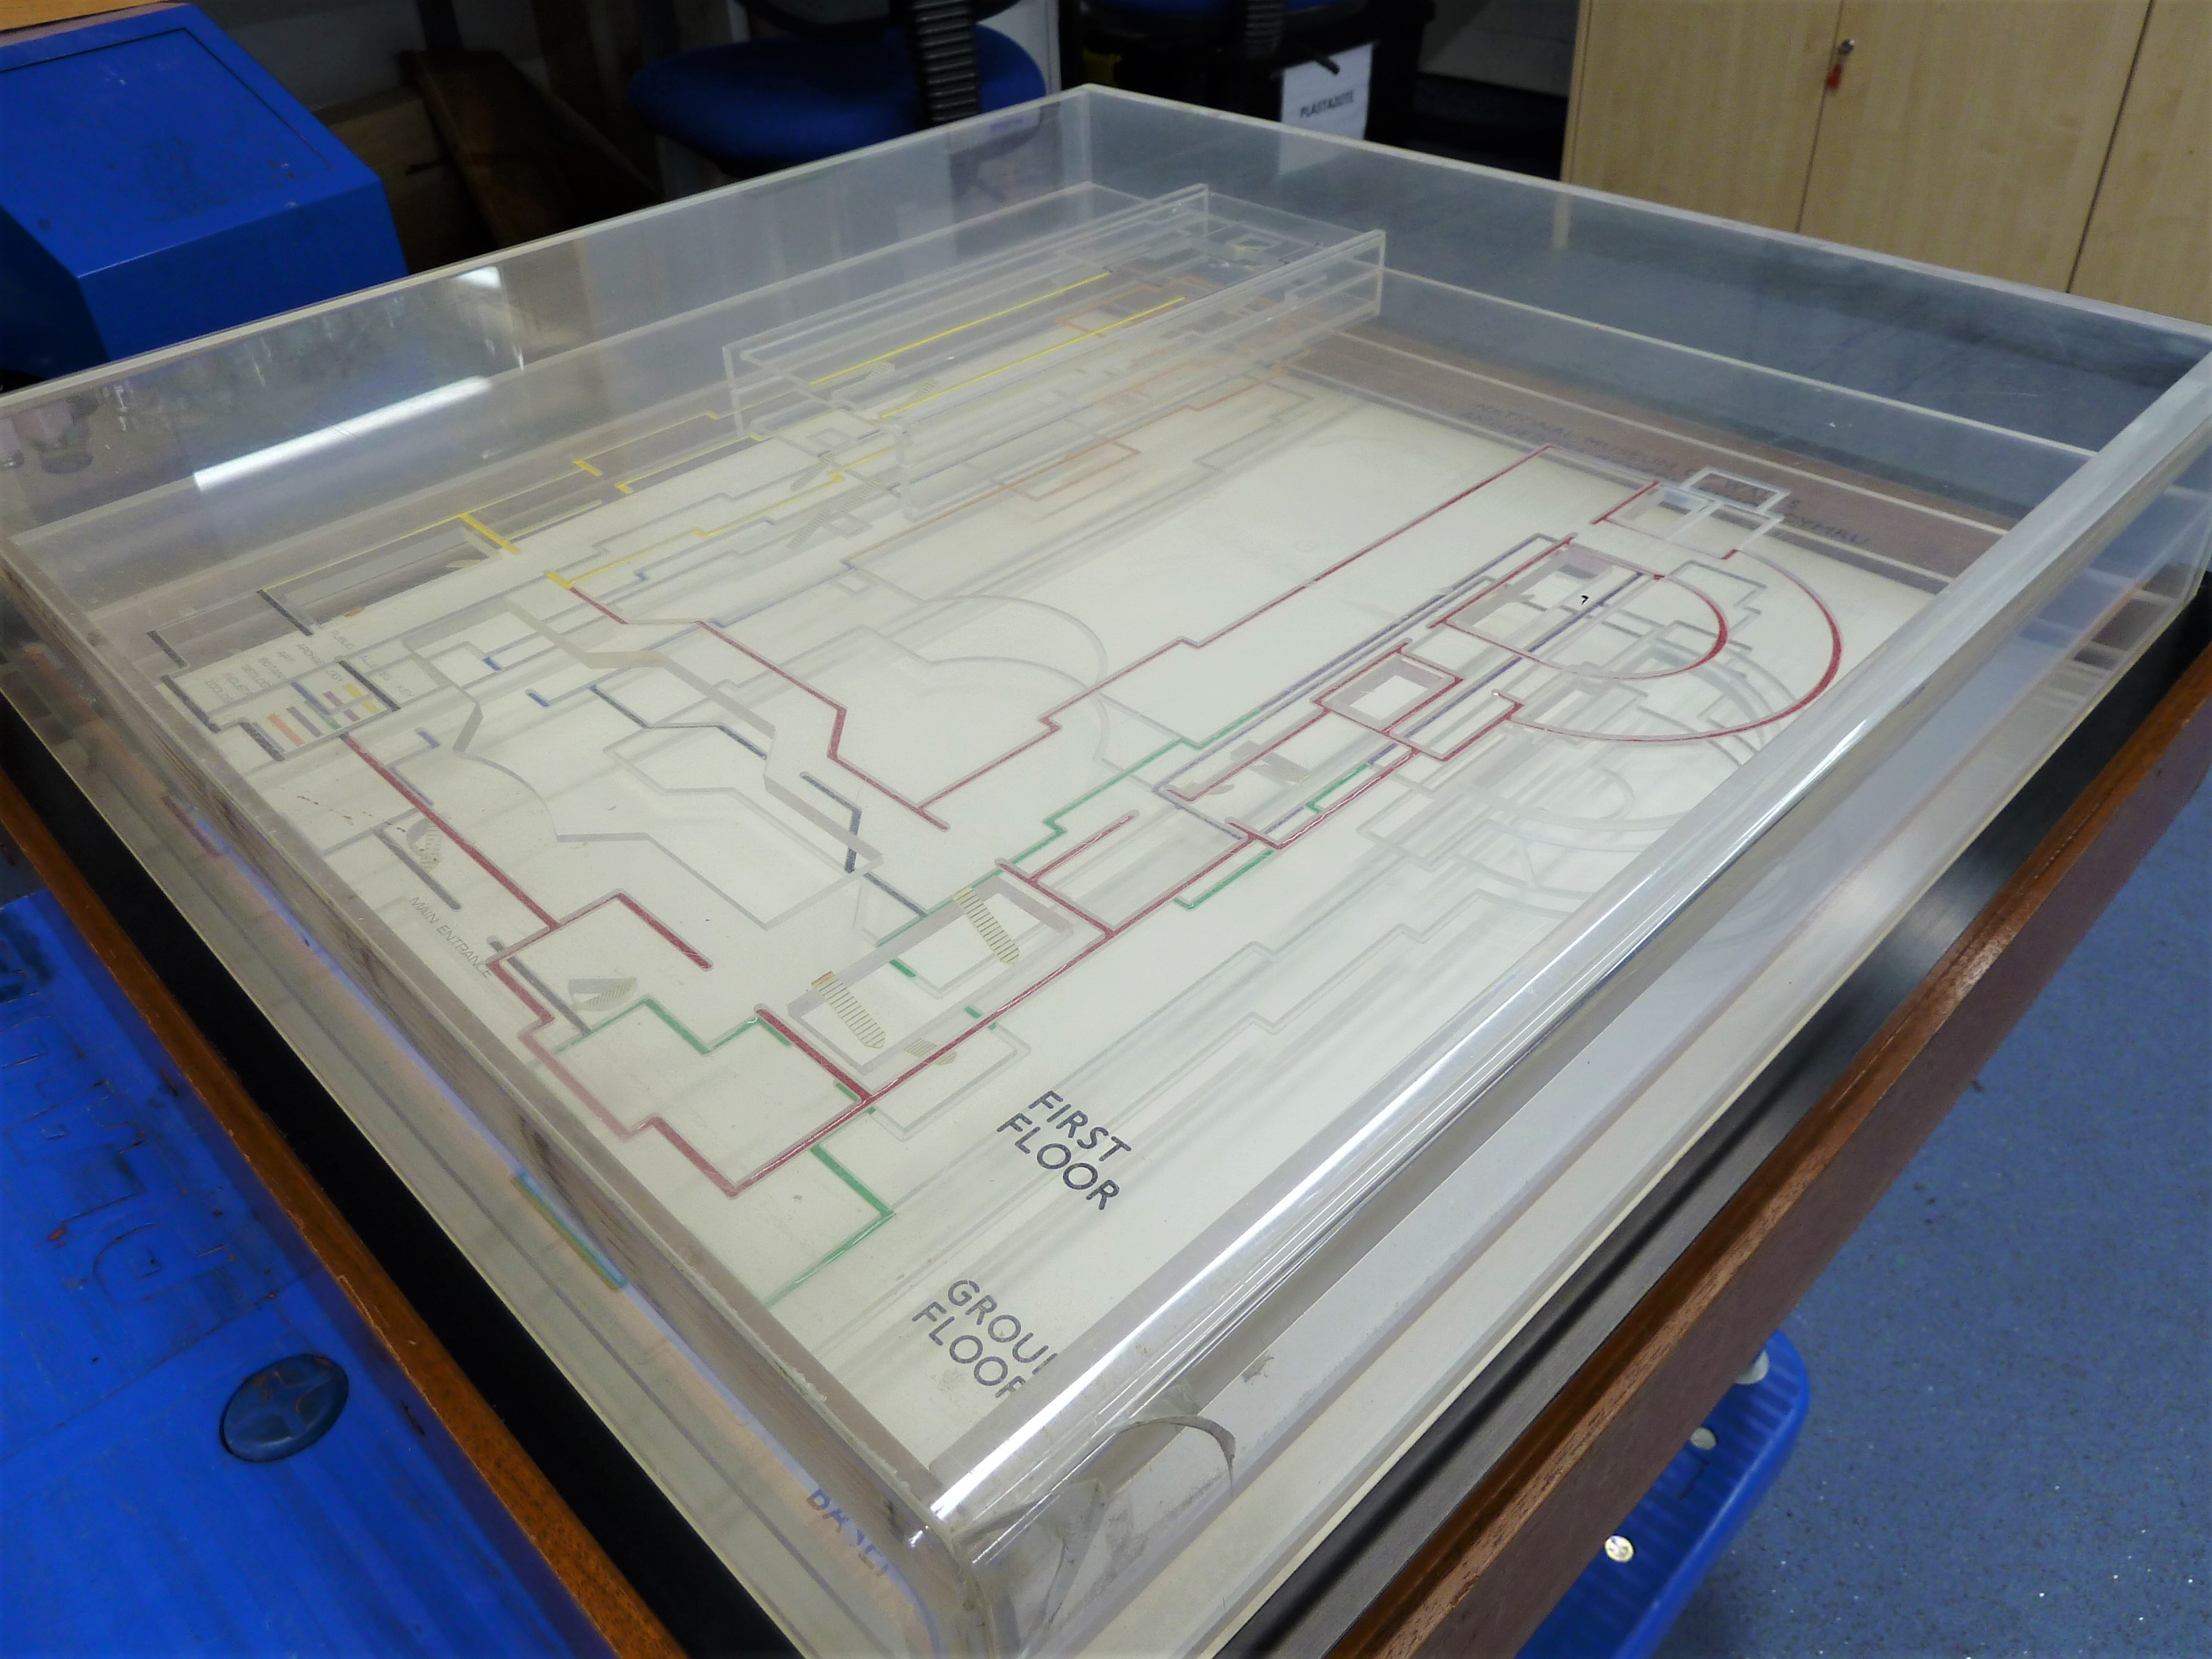 Perspex box model of National Museum Wales building in Cathays Park shown in process of conservation, designed by Christopher Shurrock [images courtesy of Jennifer Griffiths, Conservator]